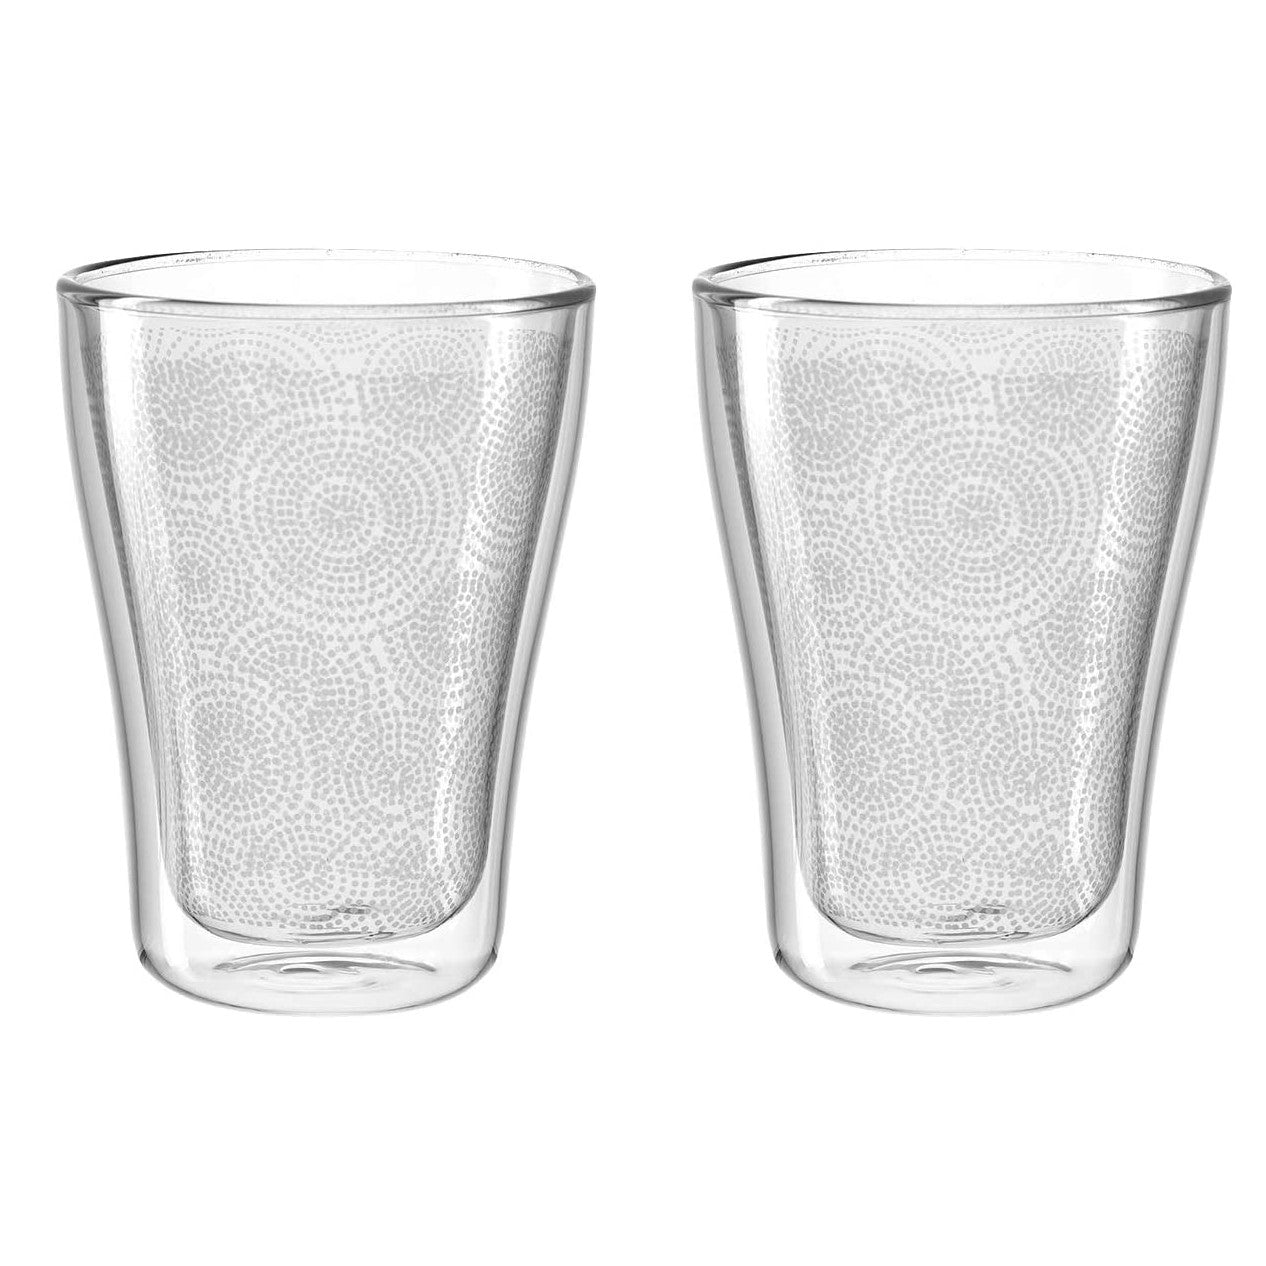 Leonardo Tumblers Double-Wall for Hot & Cold Drinks DUO 345ml - Set of 2